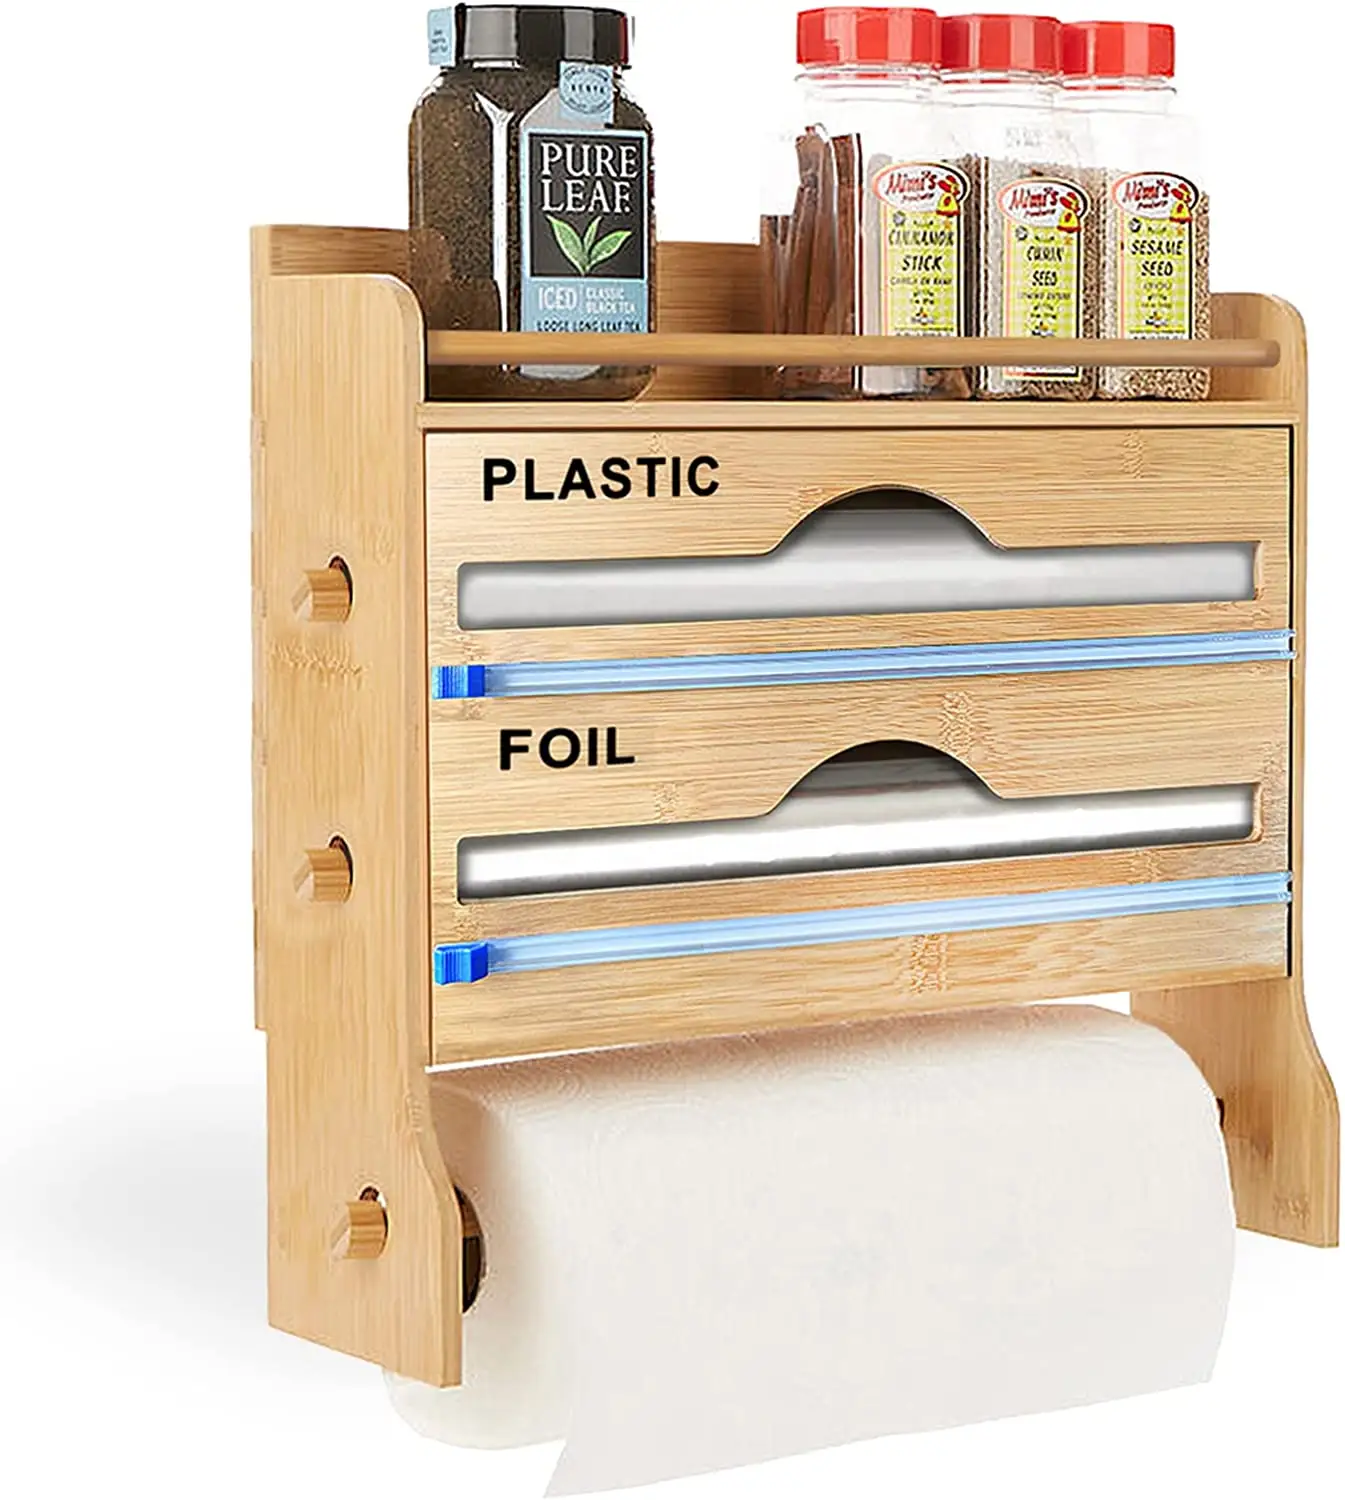 Bamboo 4 in 1 Foil and Plastic Wrap Organizer with Cutter Kitchen Paper Towel Holder Wall-Mounted Dispenser Spice Jars Organizer